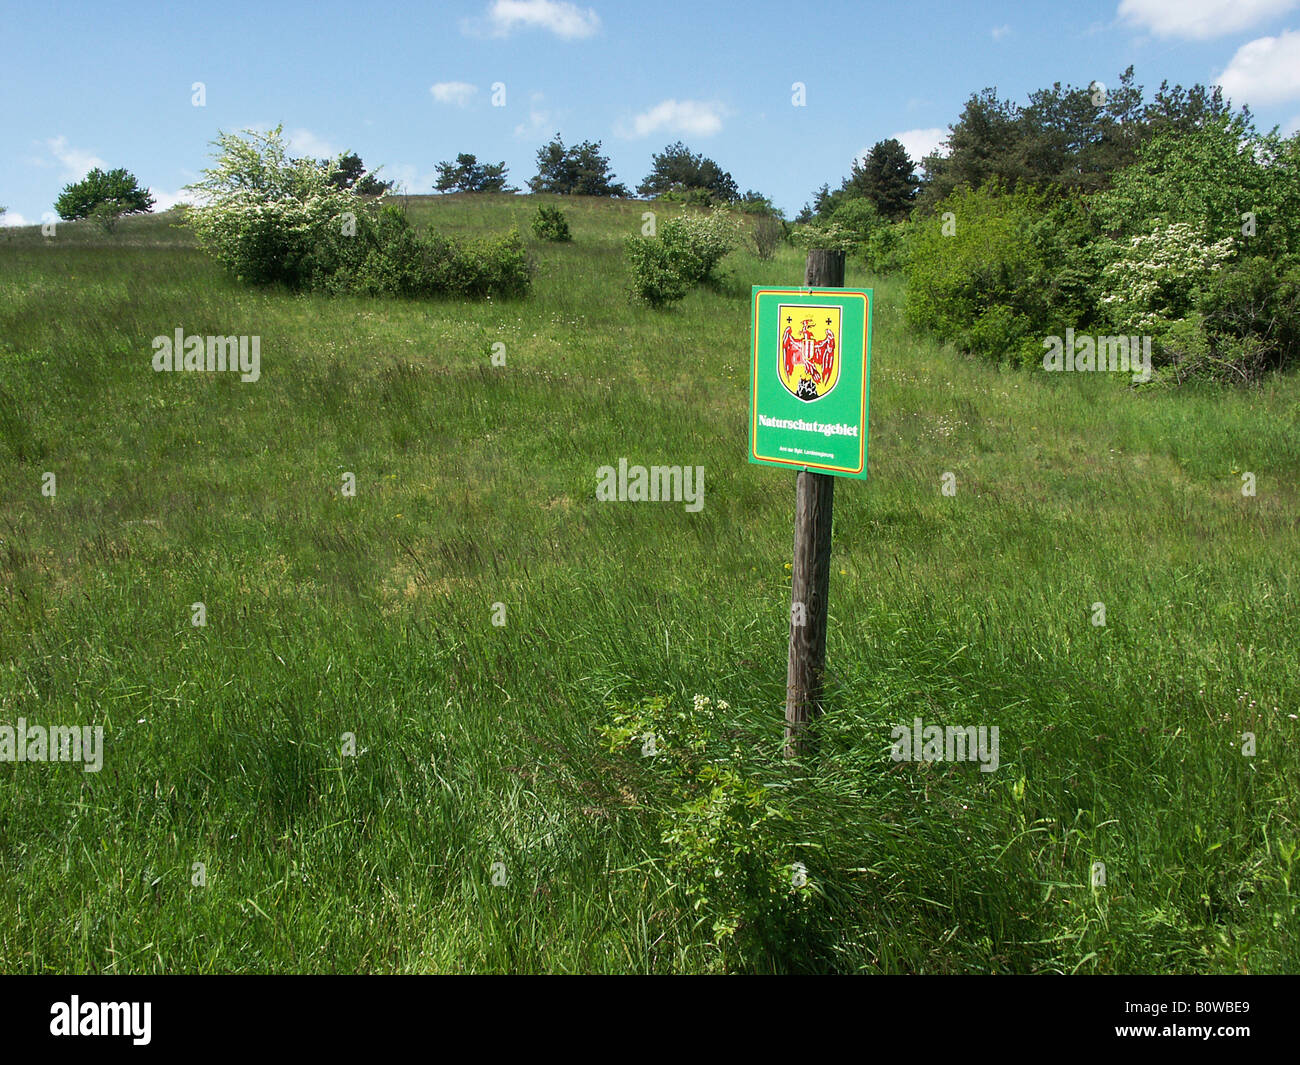 Signboard on a dowel in a hilly open countryside, Burgenland, Austria Stock Photo